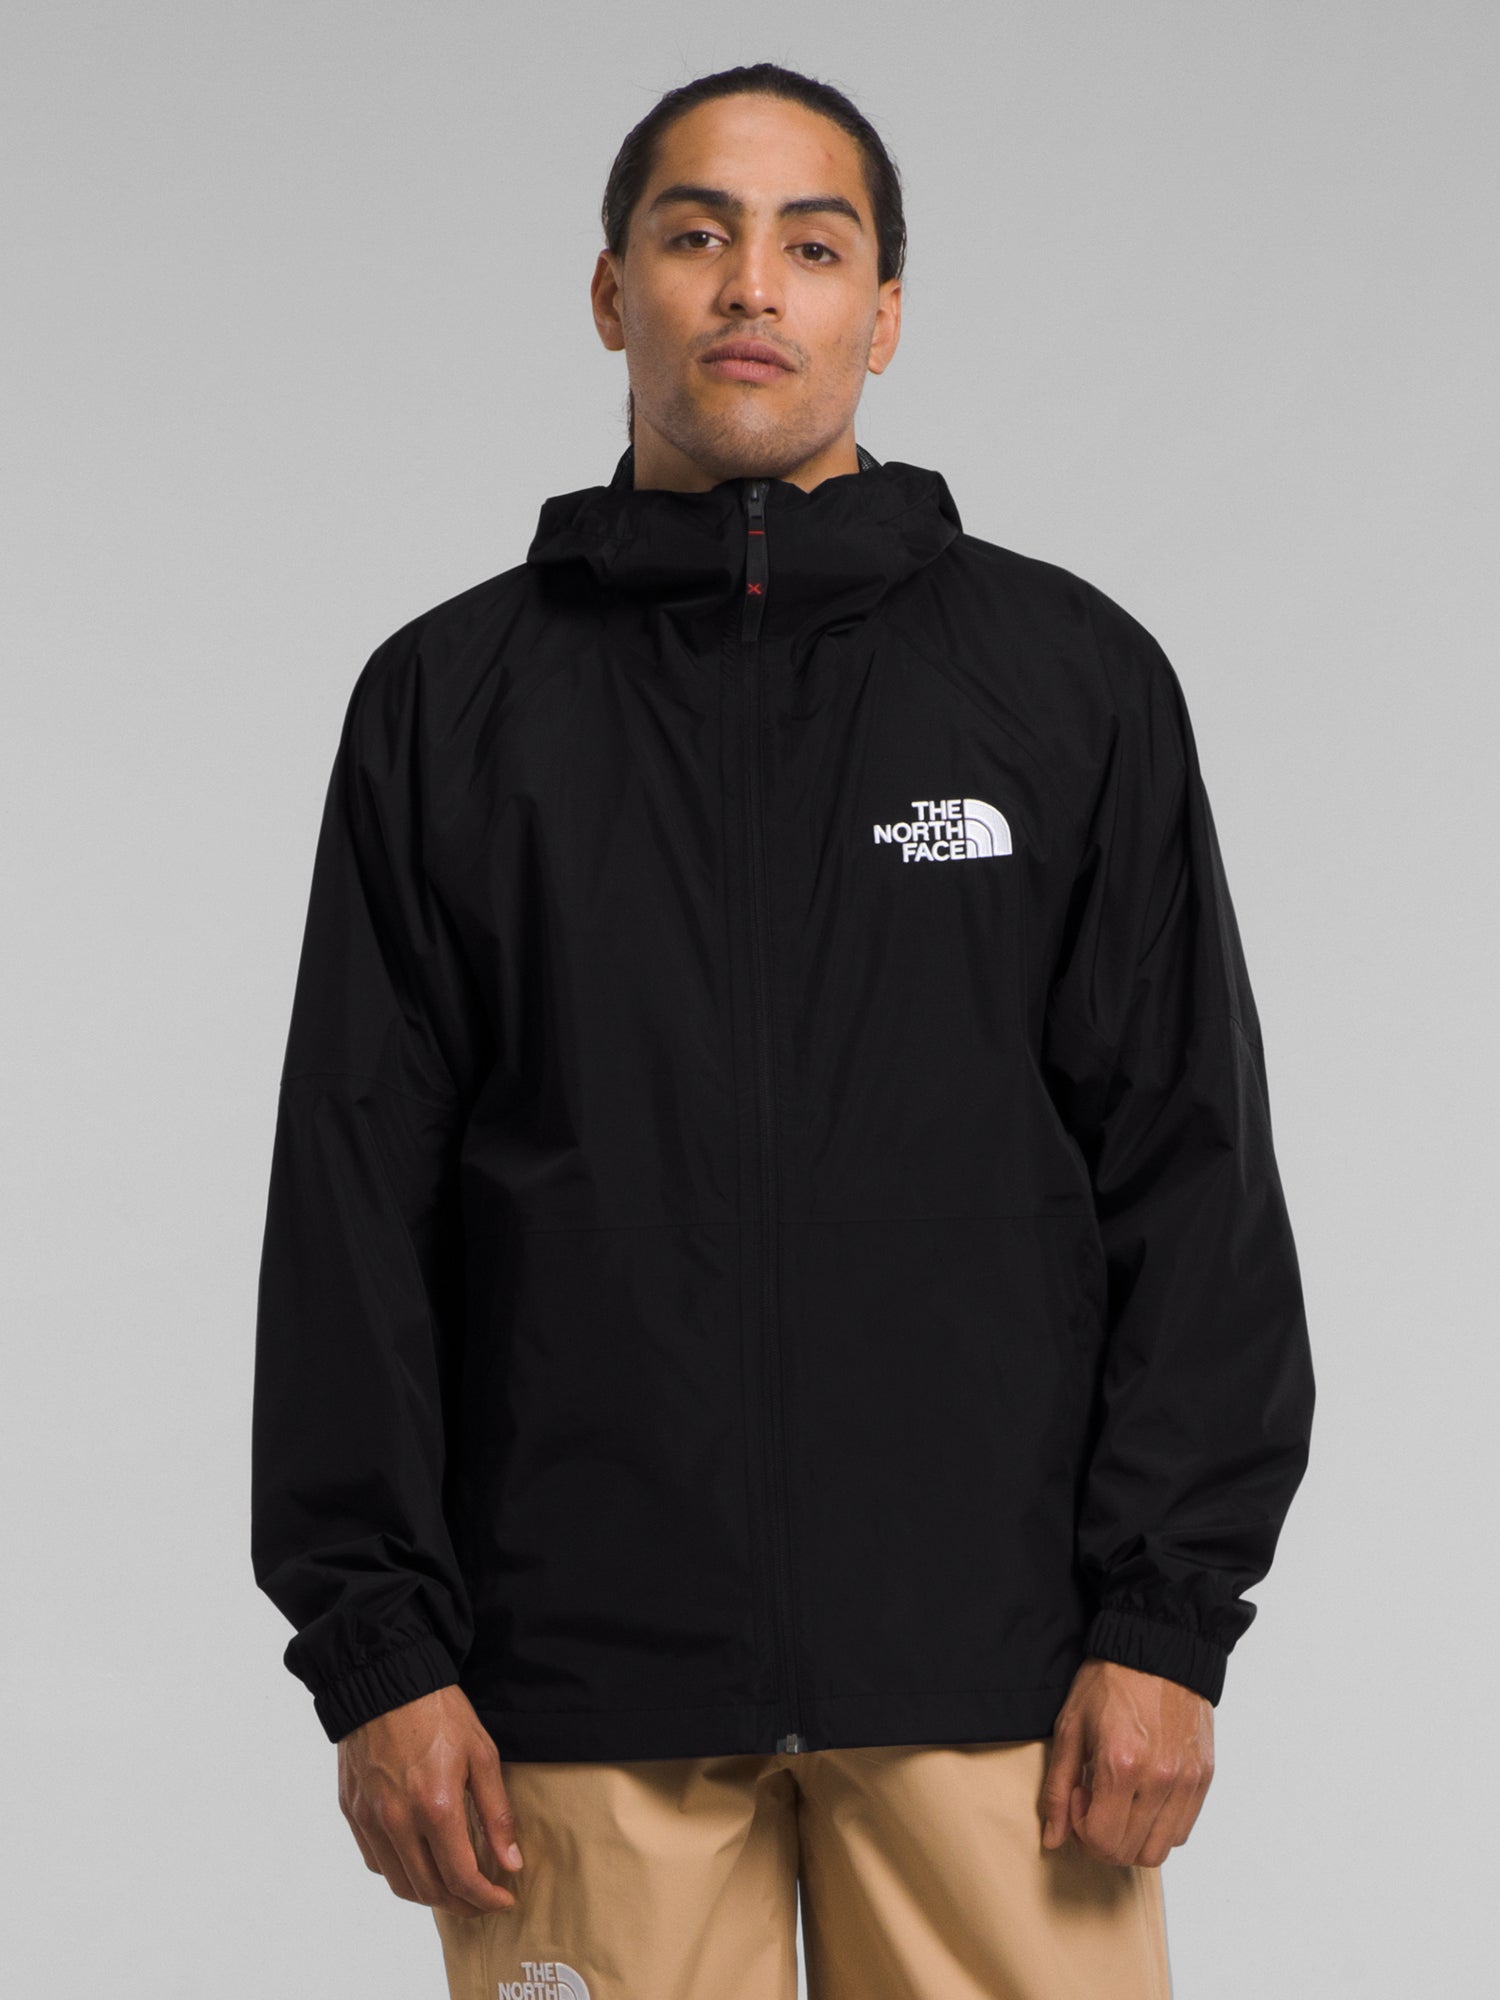 North Face Hyvent Jacket